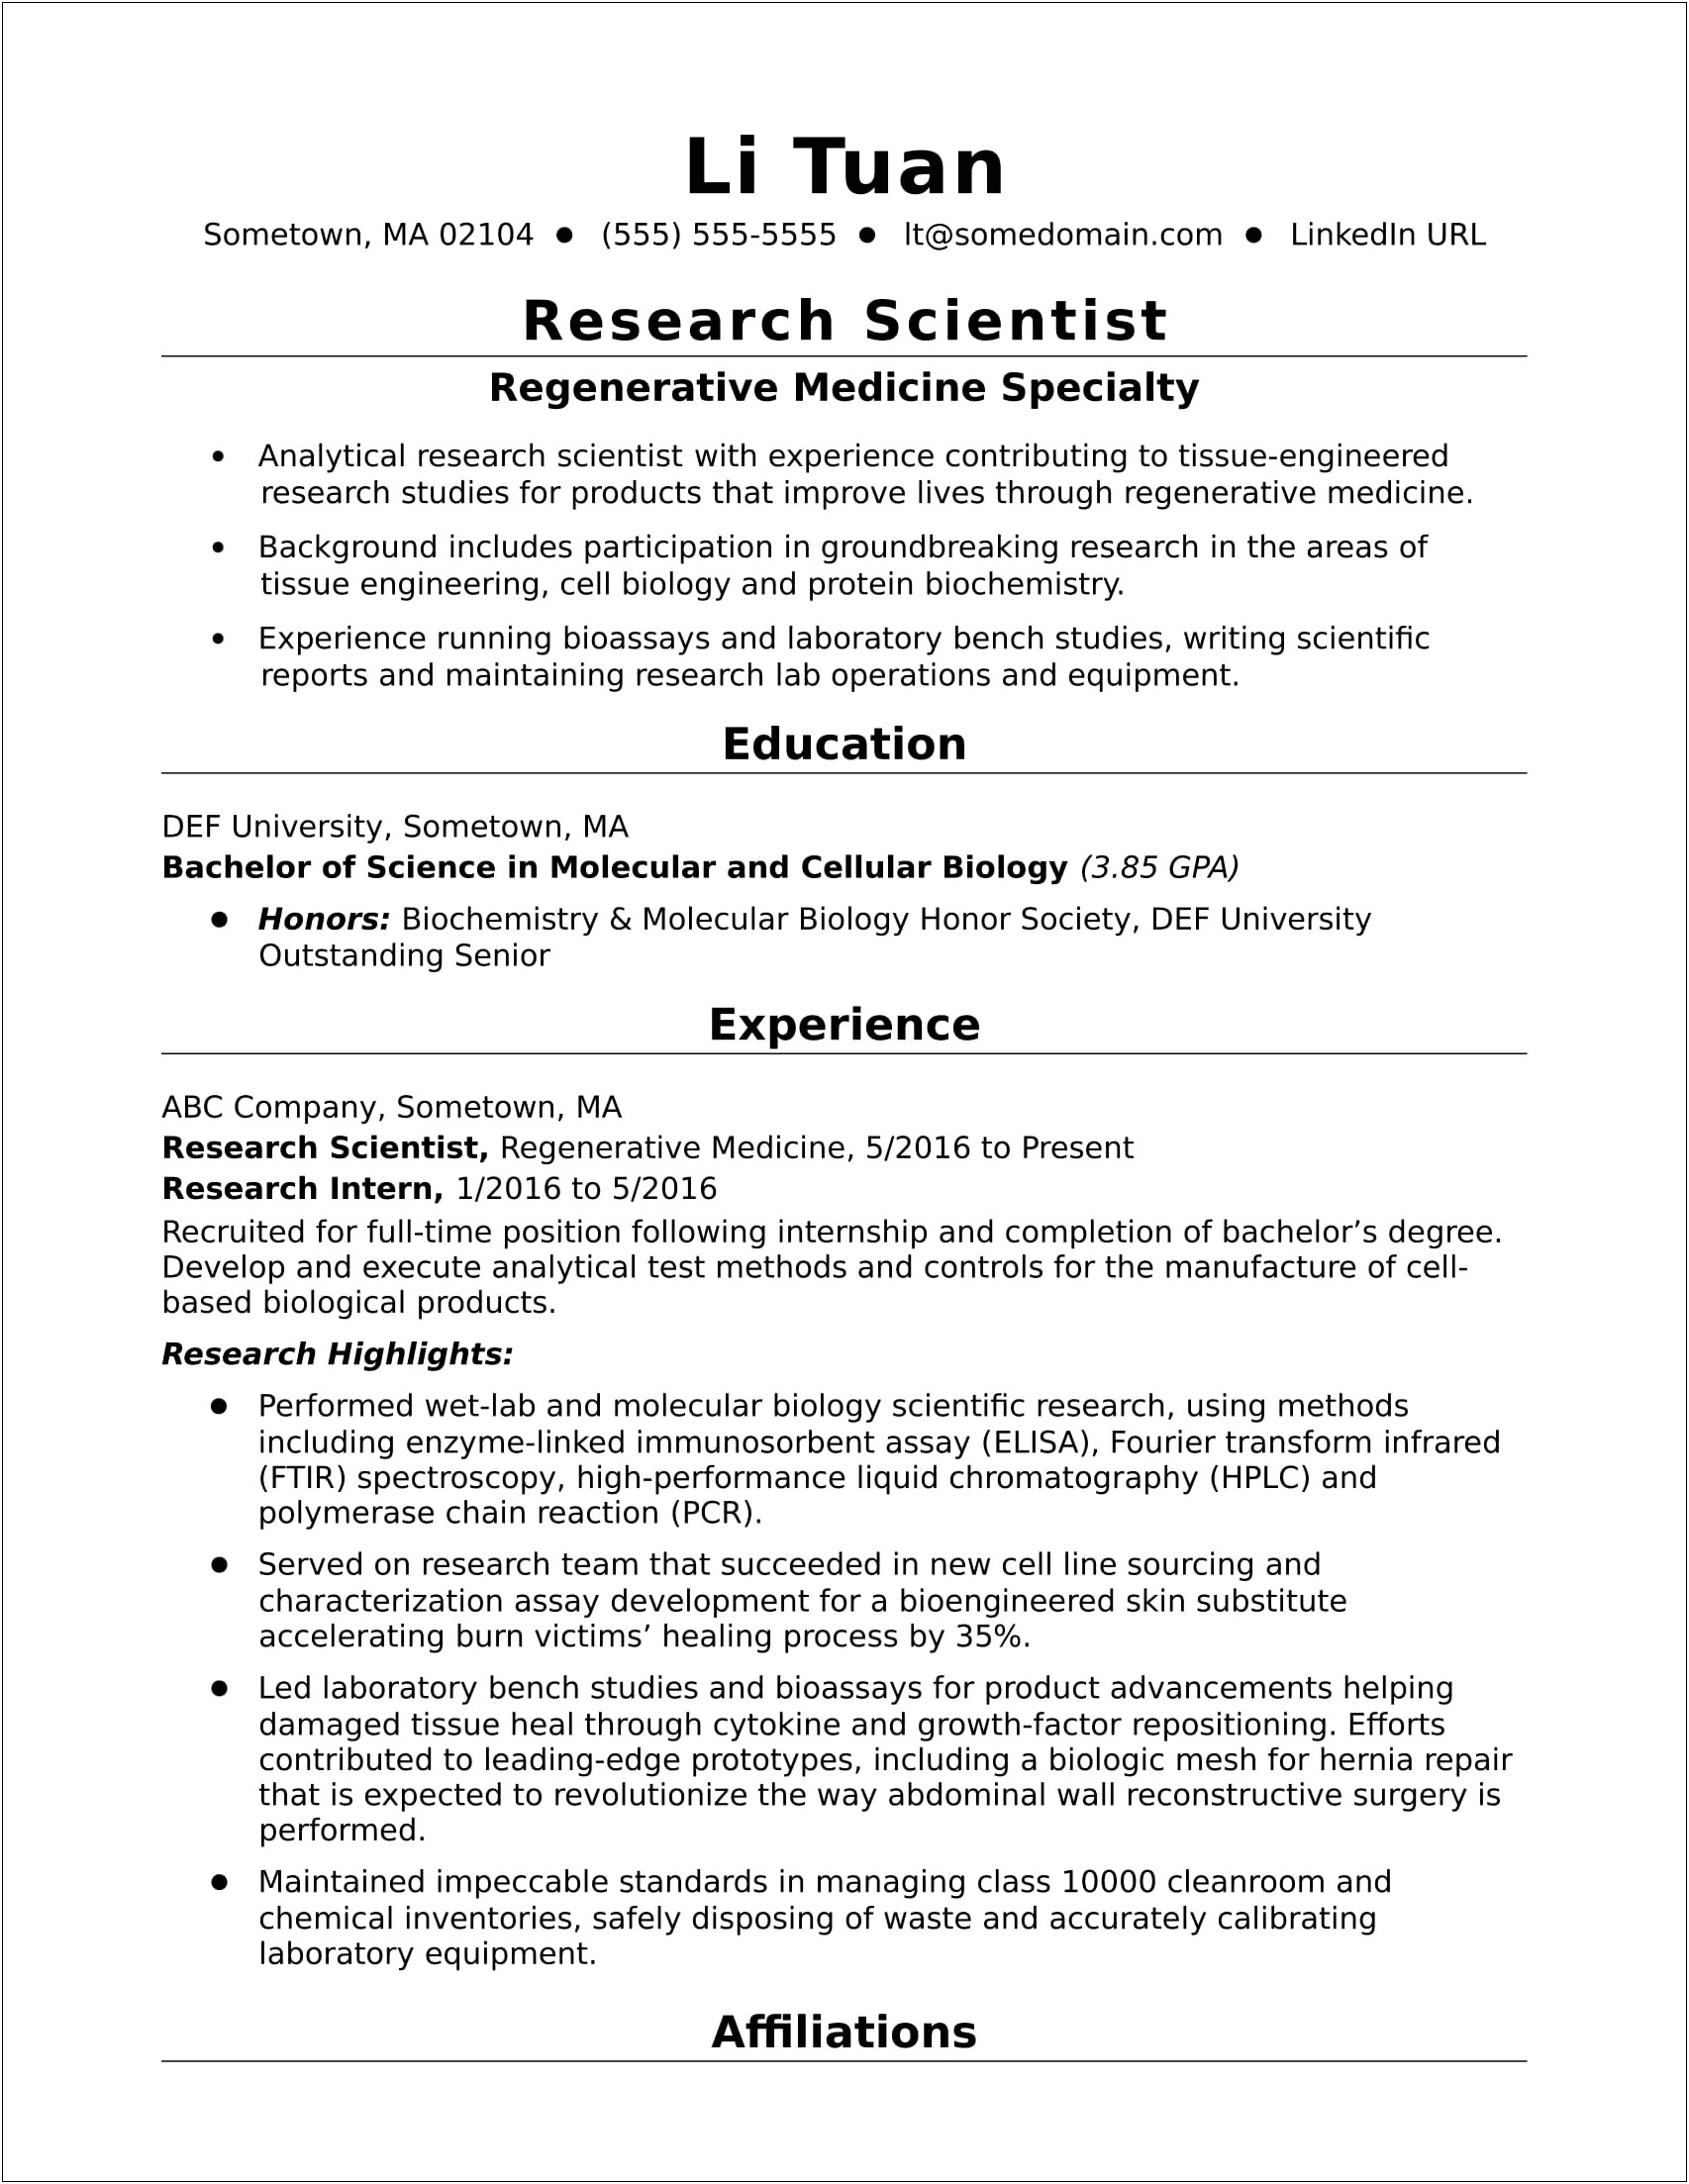 Job Matched Resumes For Scientists